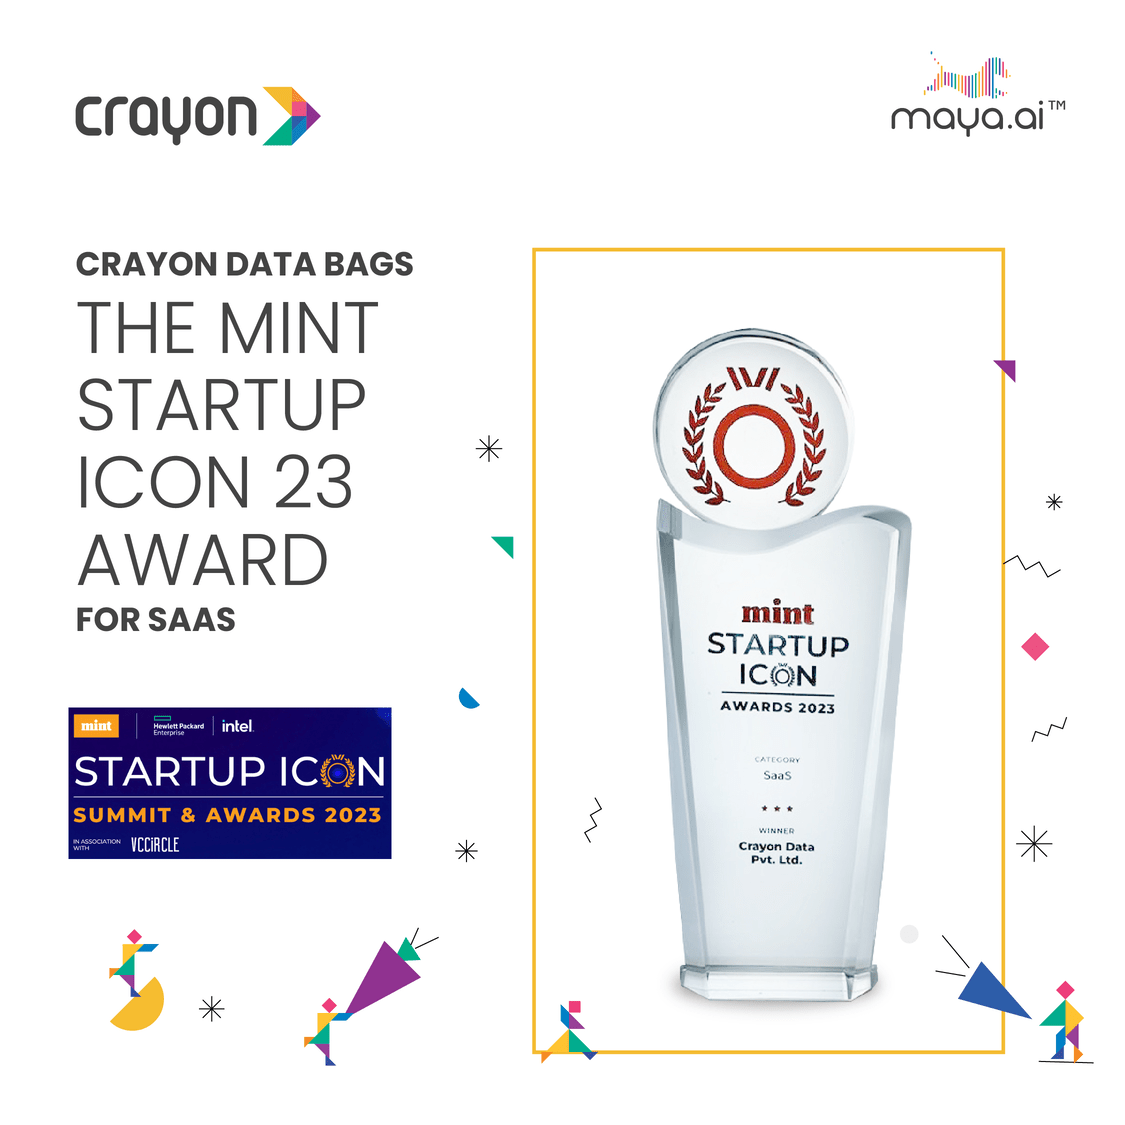 Crayon Data bags the Mint Startup ICON Awards for SaaS